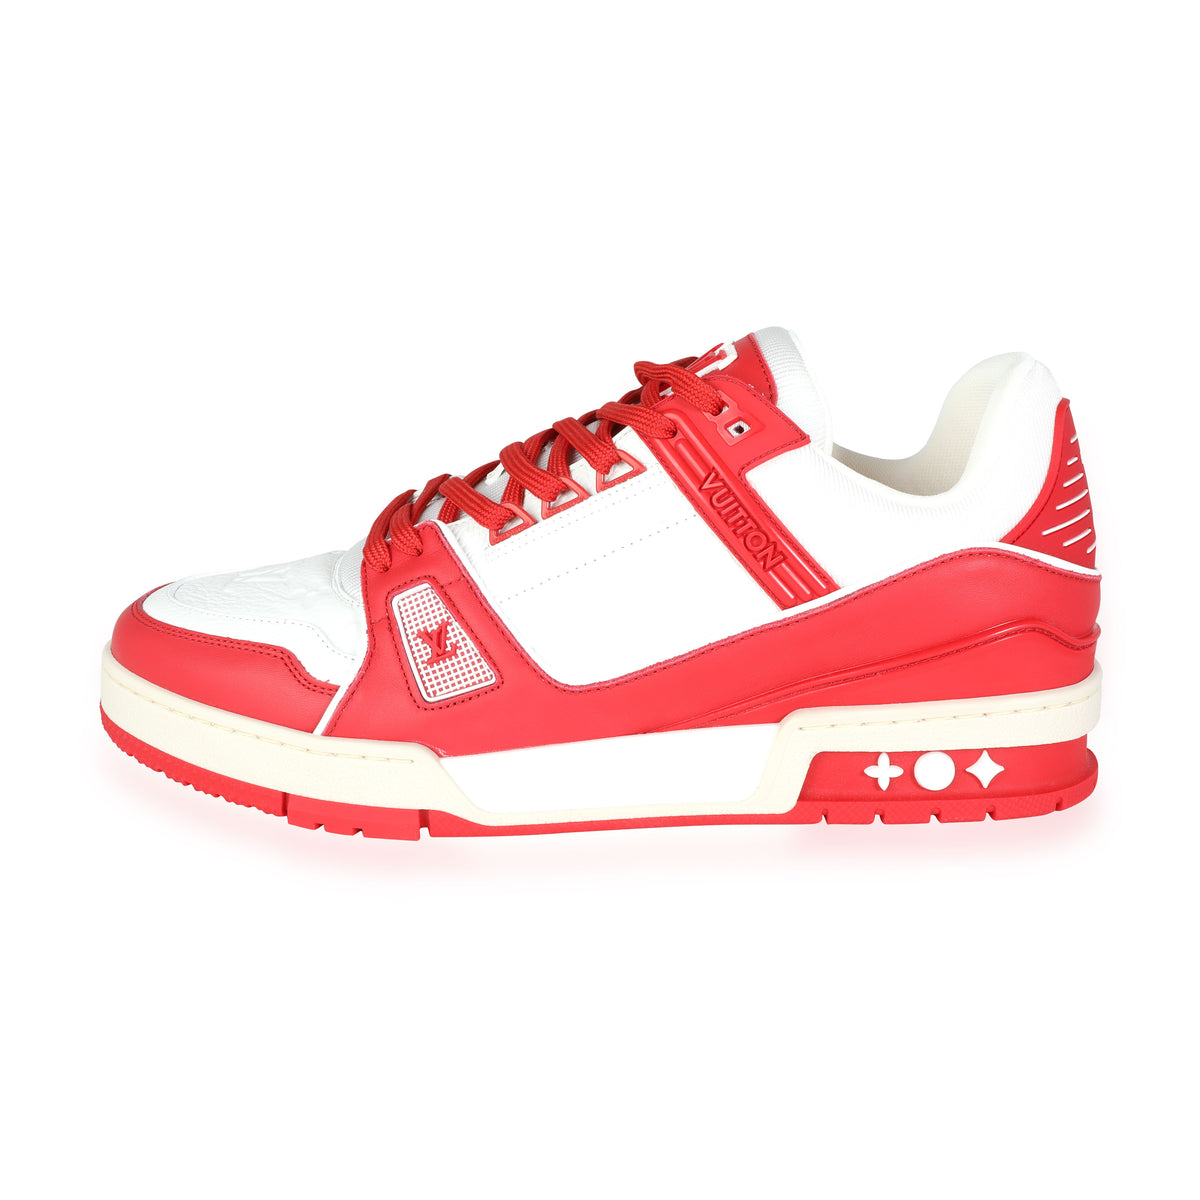 LOUIS VUITTON Calfskin Luxembourg Sneakers 10 White Red Blue